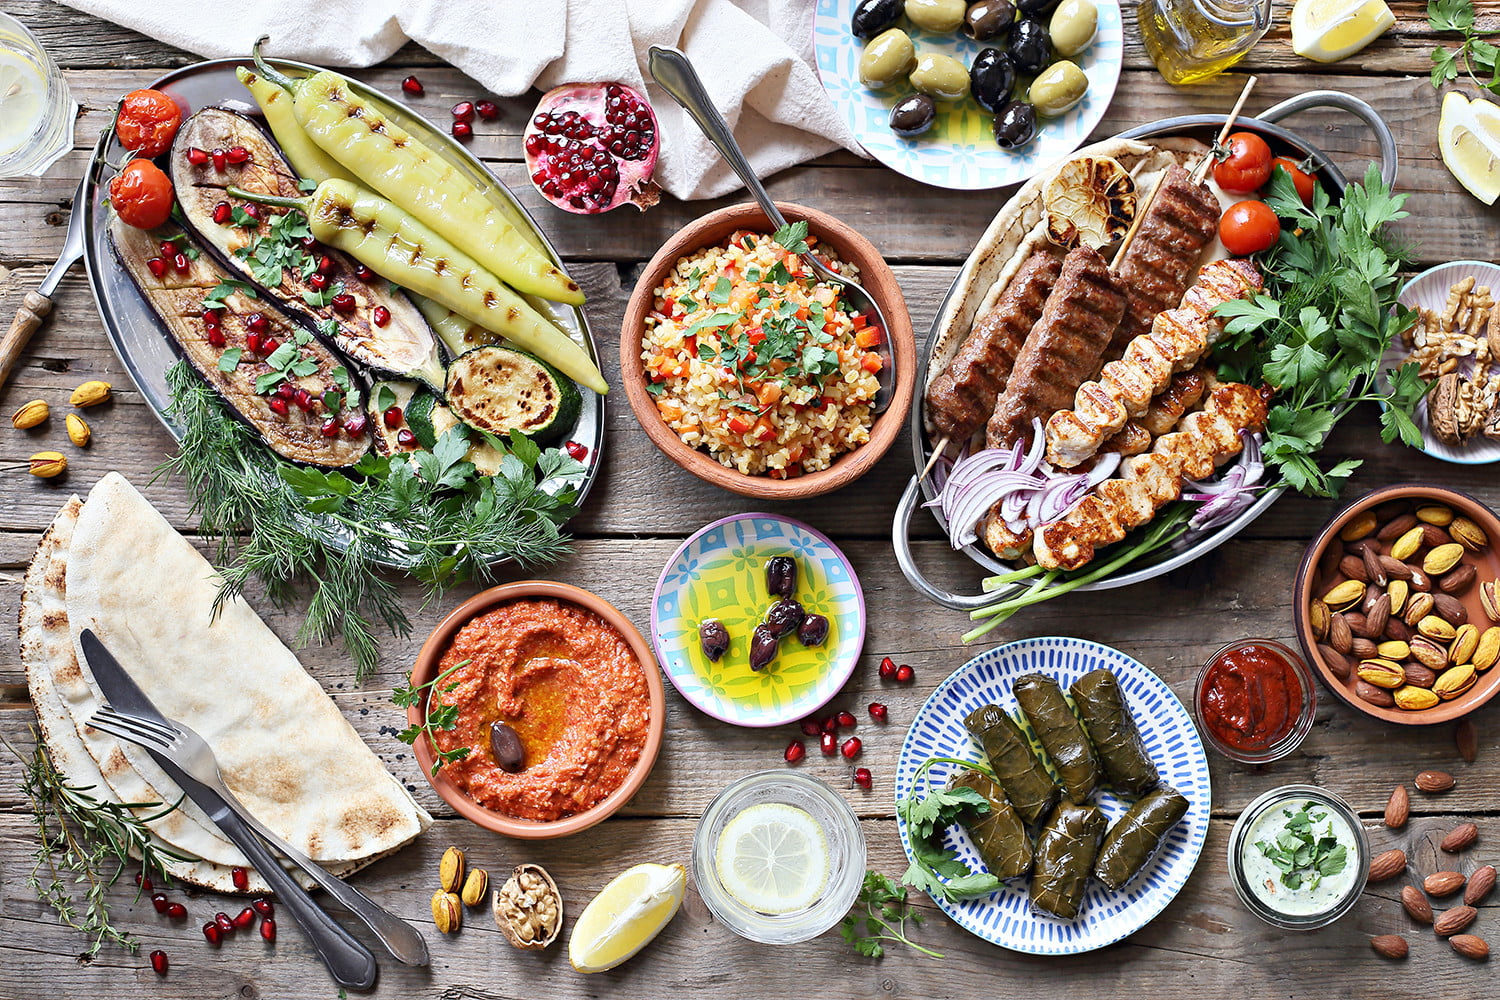 Components of Middle East Food Platter2